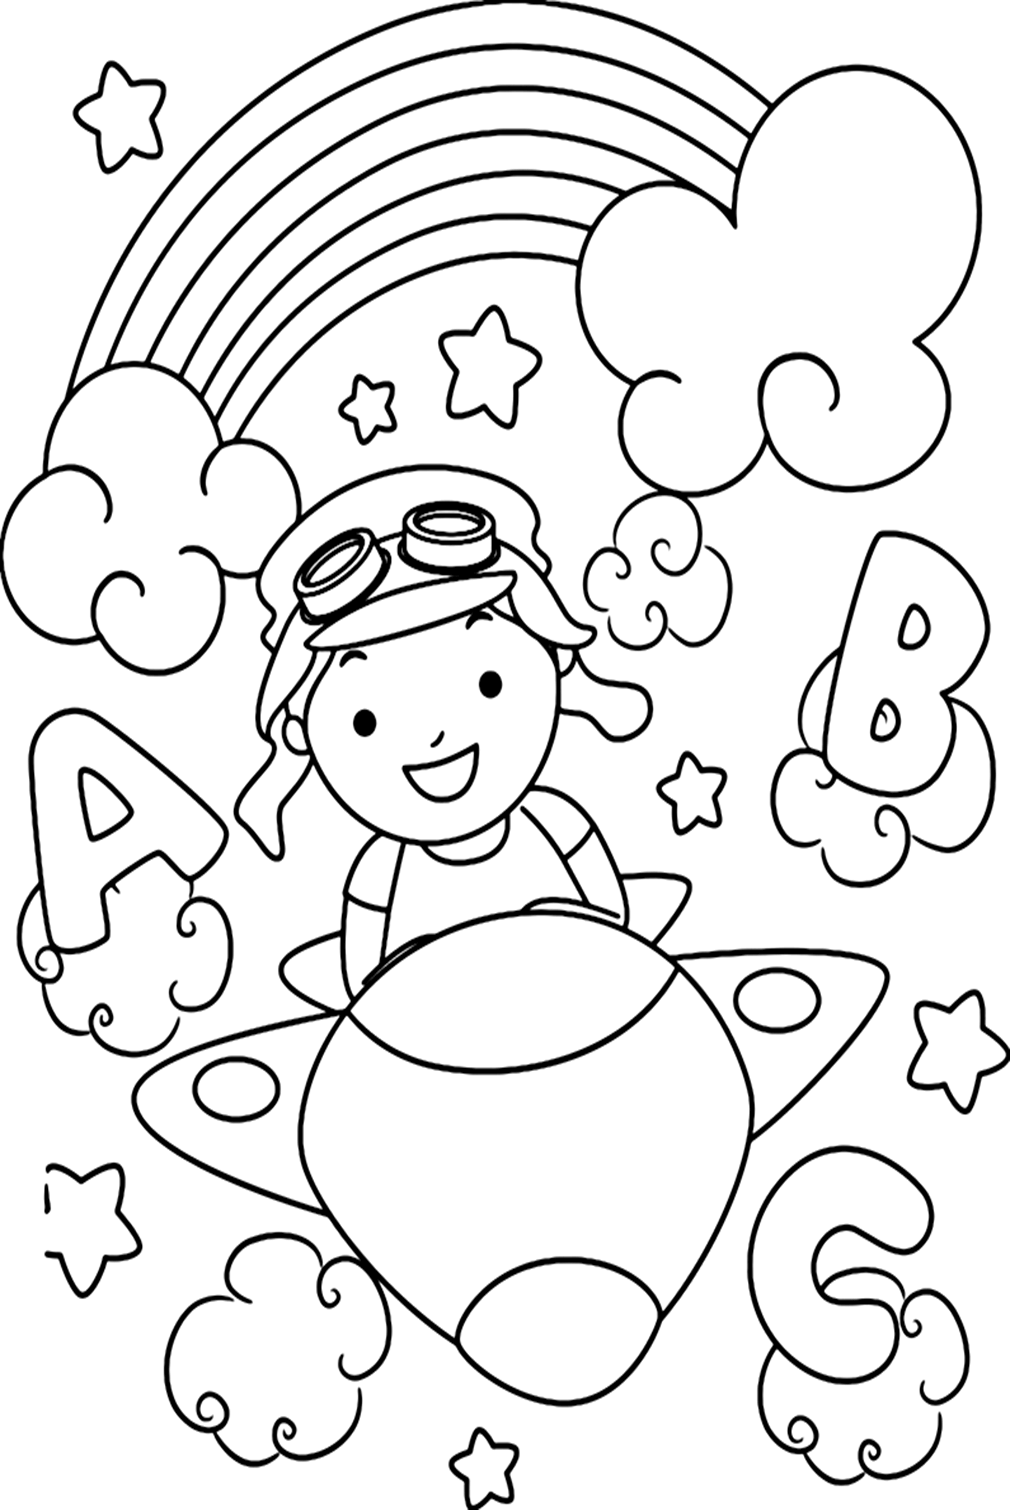 Cute Rainbow Coloring Page